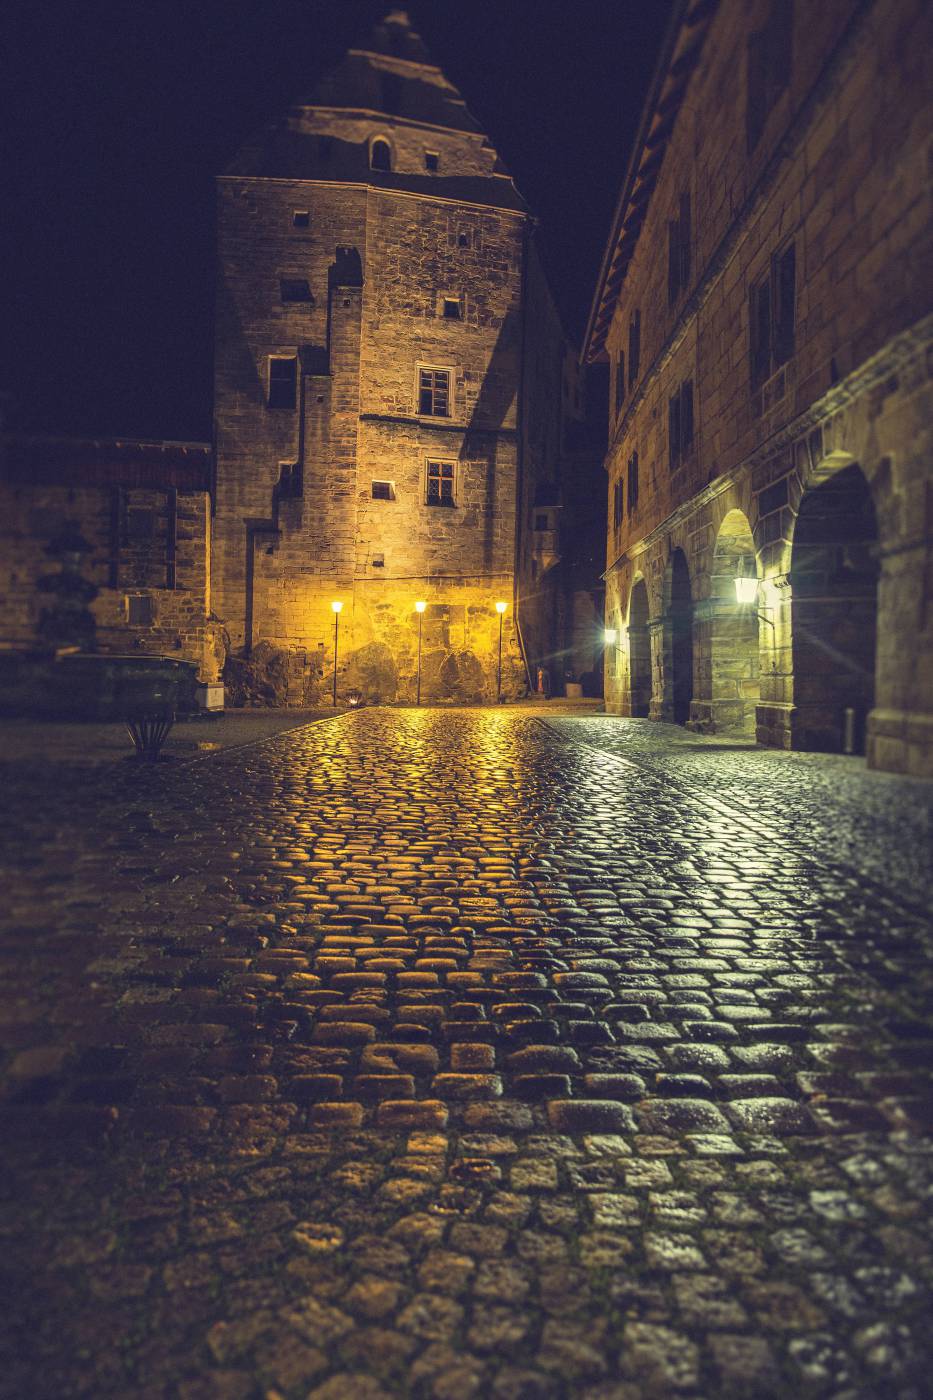 night at historical castle/ picture